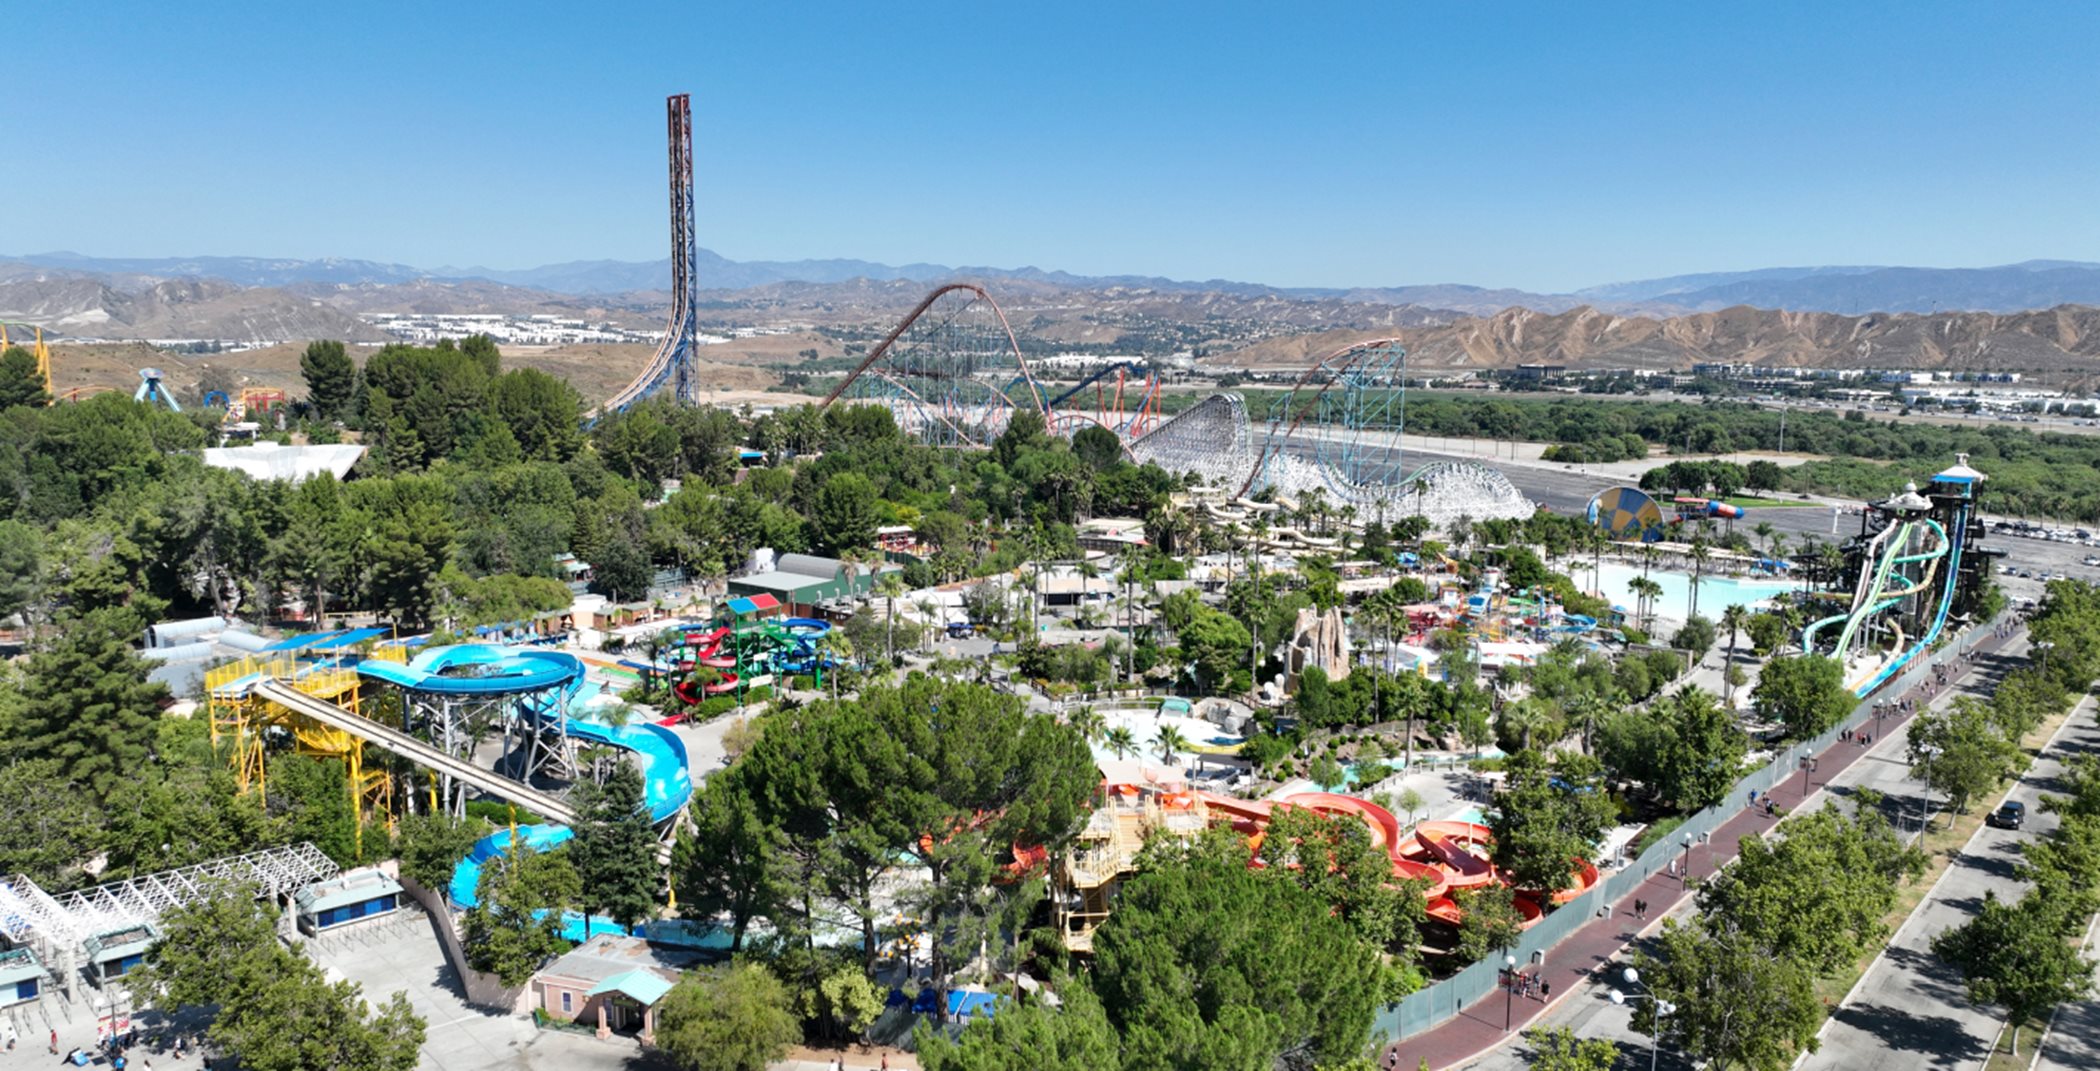 Aerial view of the rides at Six Flags